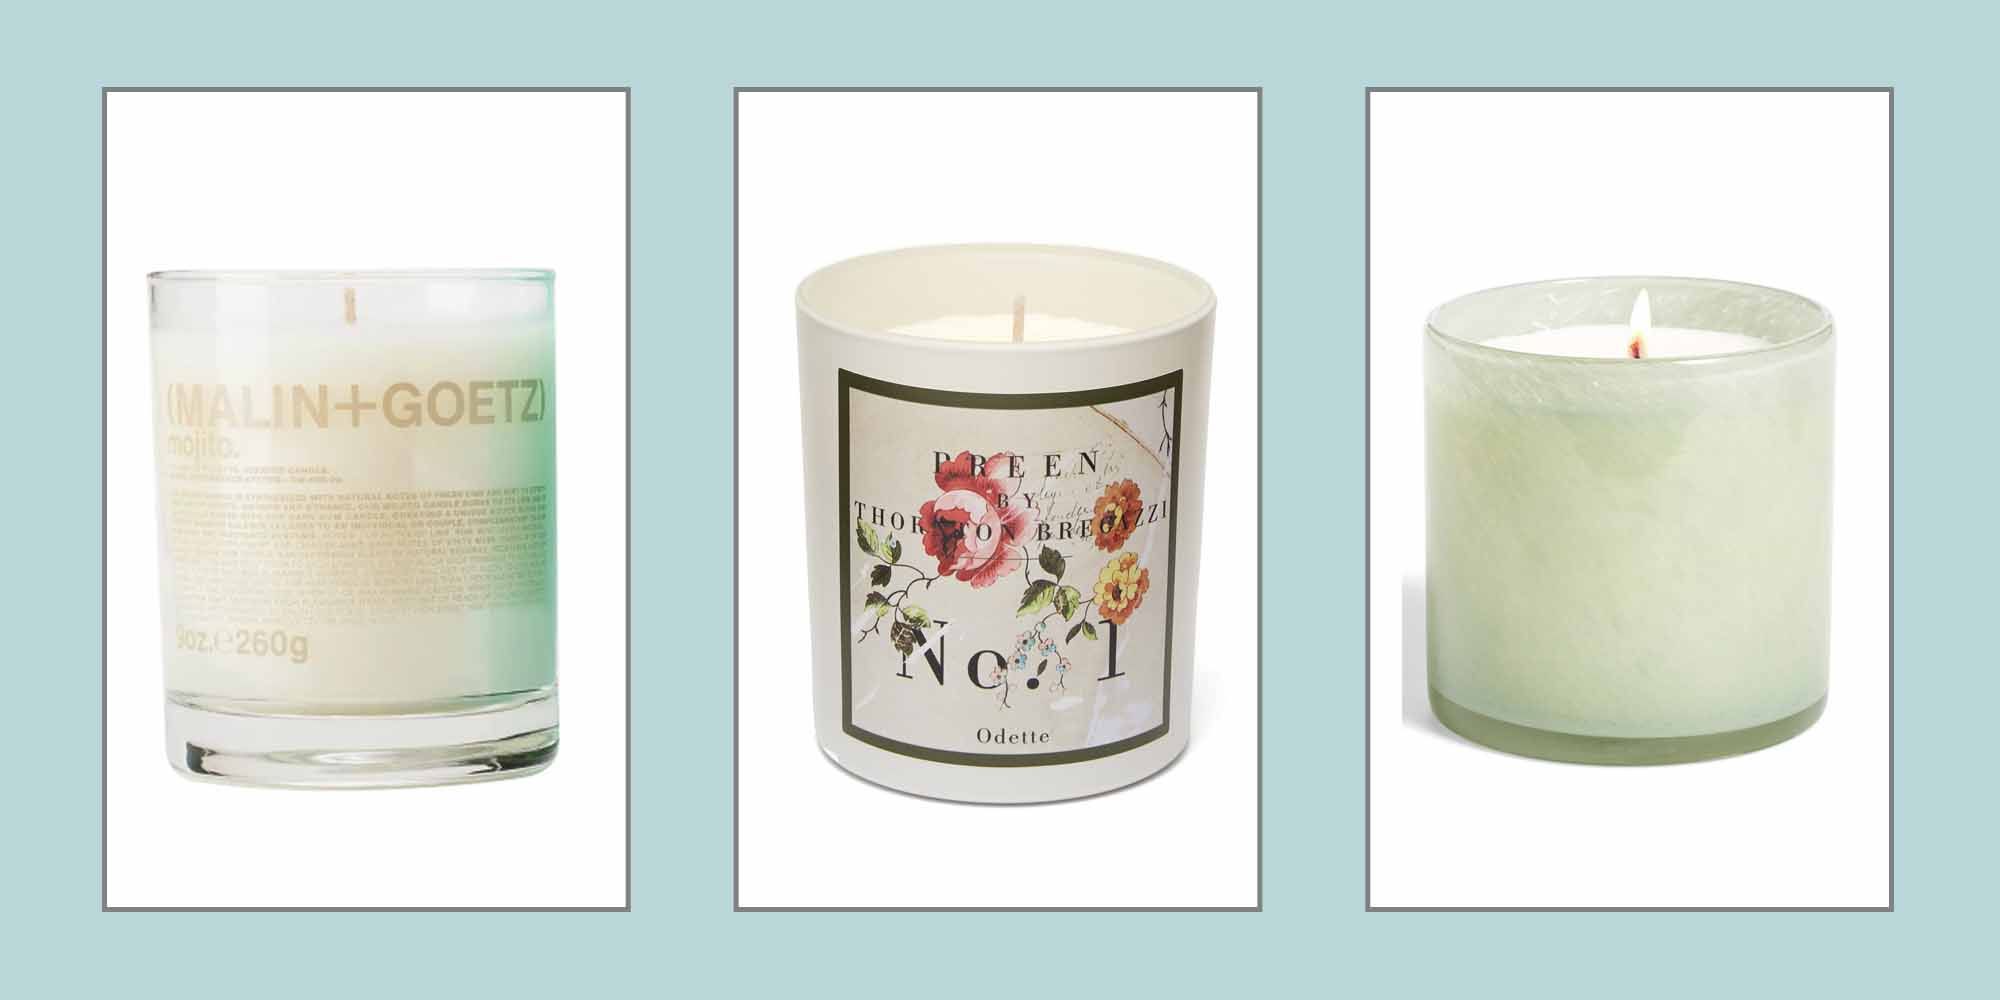 heavily scented candles